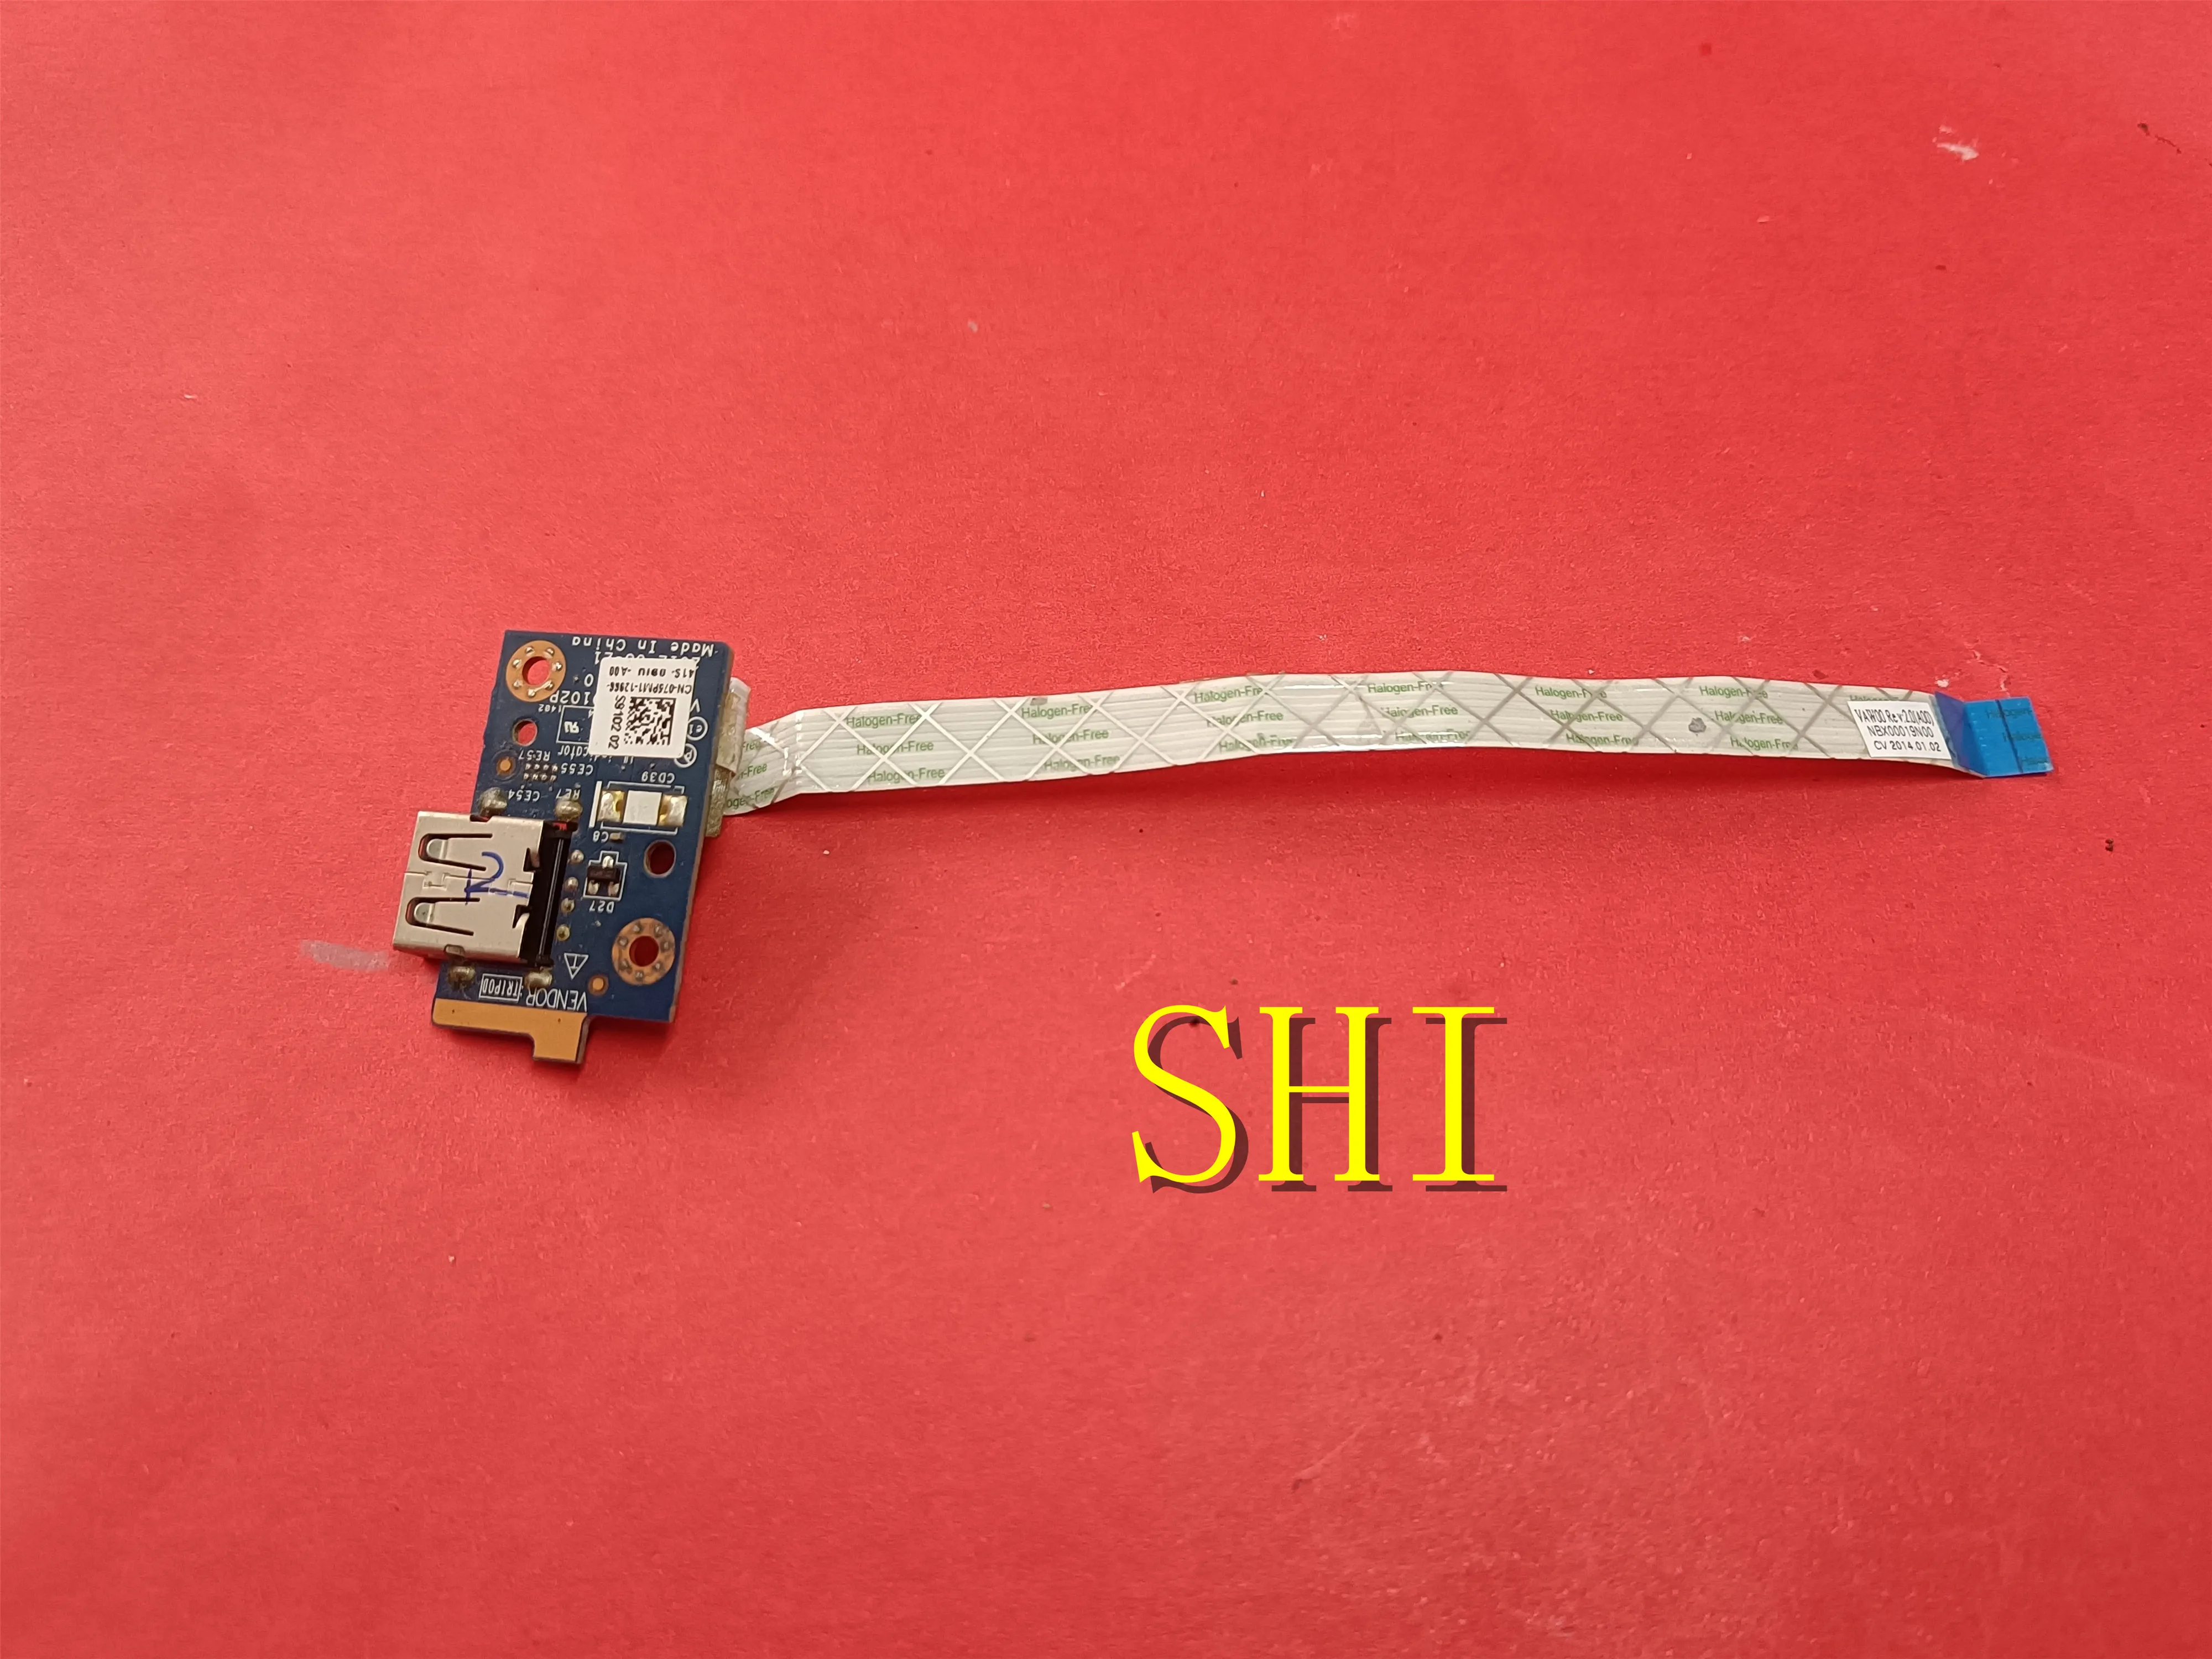 FOR Dell 15-3521 15 3521 3537 USB Port Board & Cable LS-9102P 075PM1 английская клавиатура для ноутбука dell inspiron 15 3521 15r 5521 15 3537 0yh3fc yh3fc клавиатура для ноутбука с черной рамкой сша